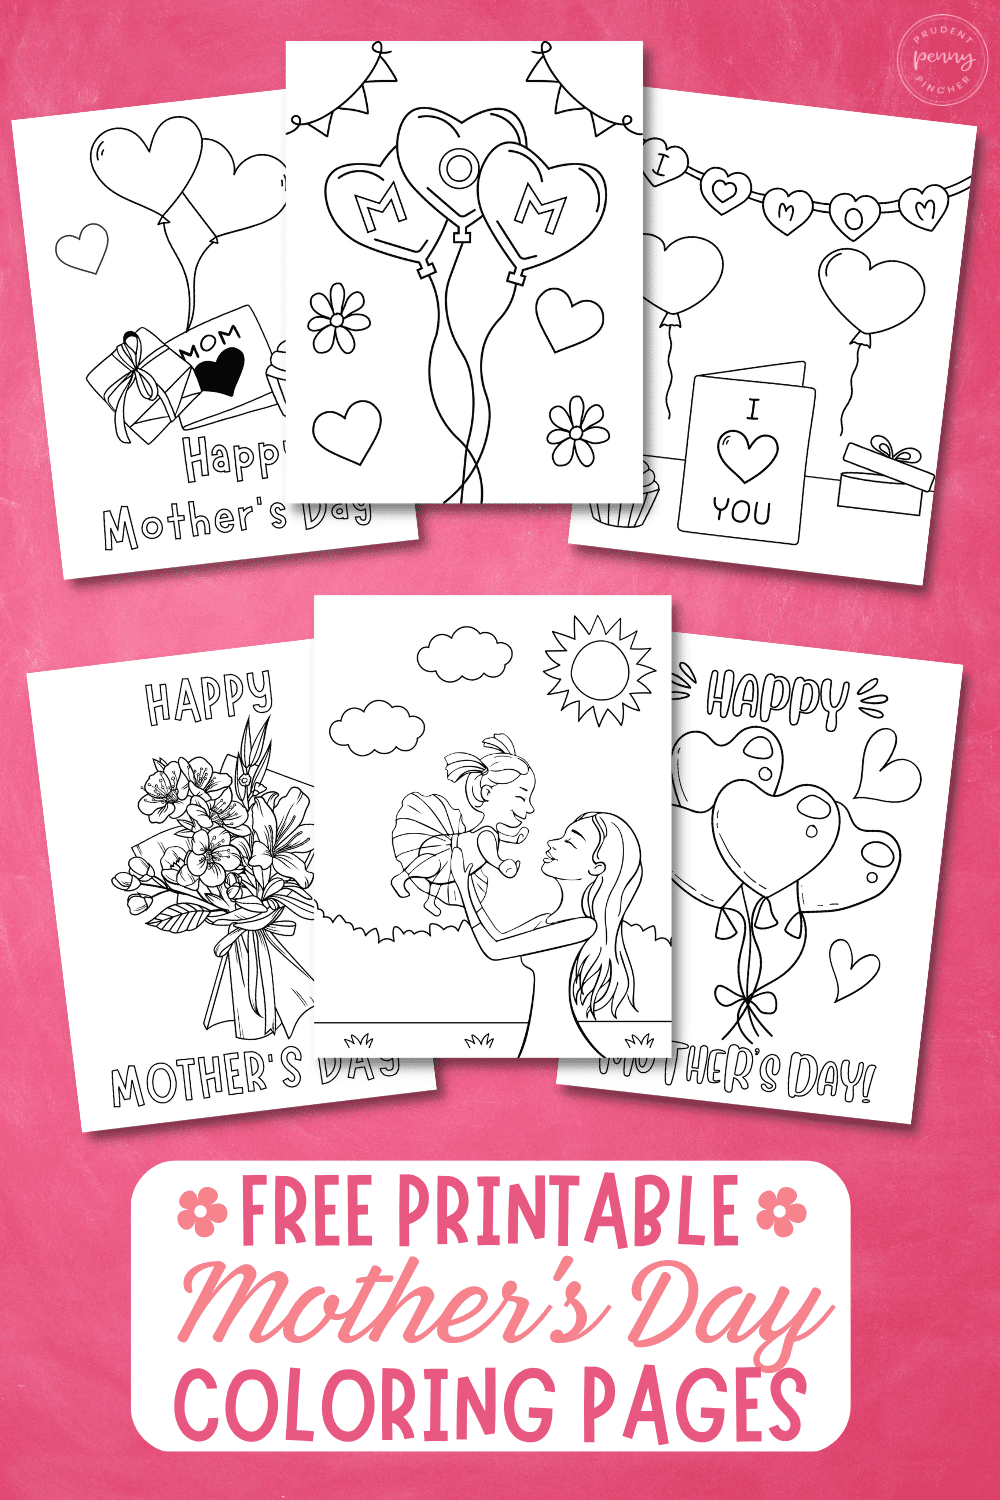 https://www.prudentpennypincher.com/wp-content/uploads/2023/03/mothers-day-coloring-pages-for-kids-PIN.png